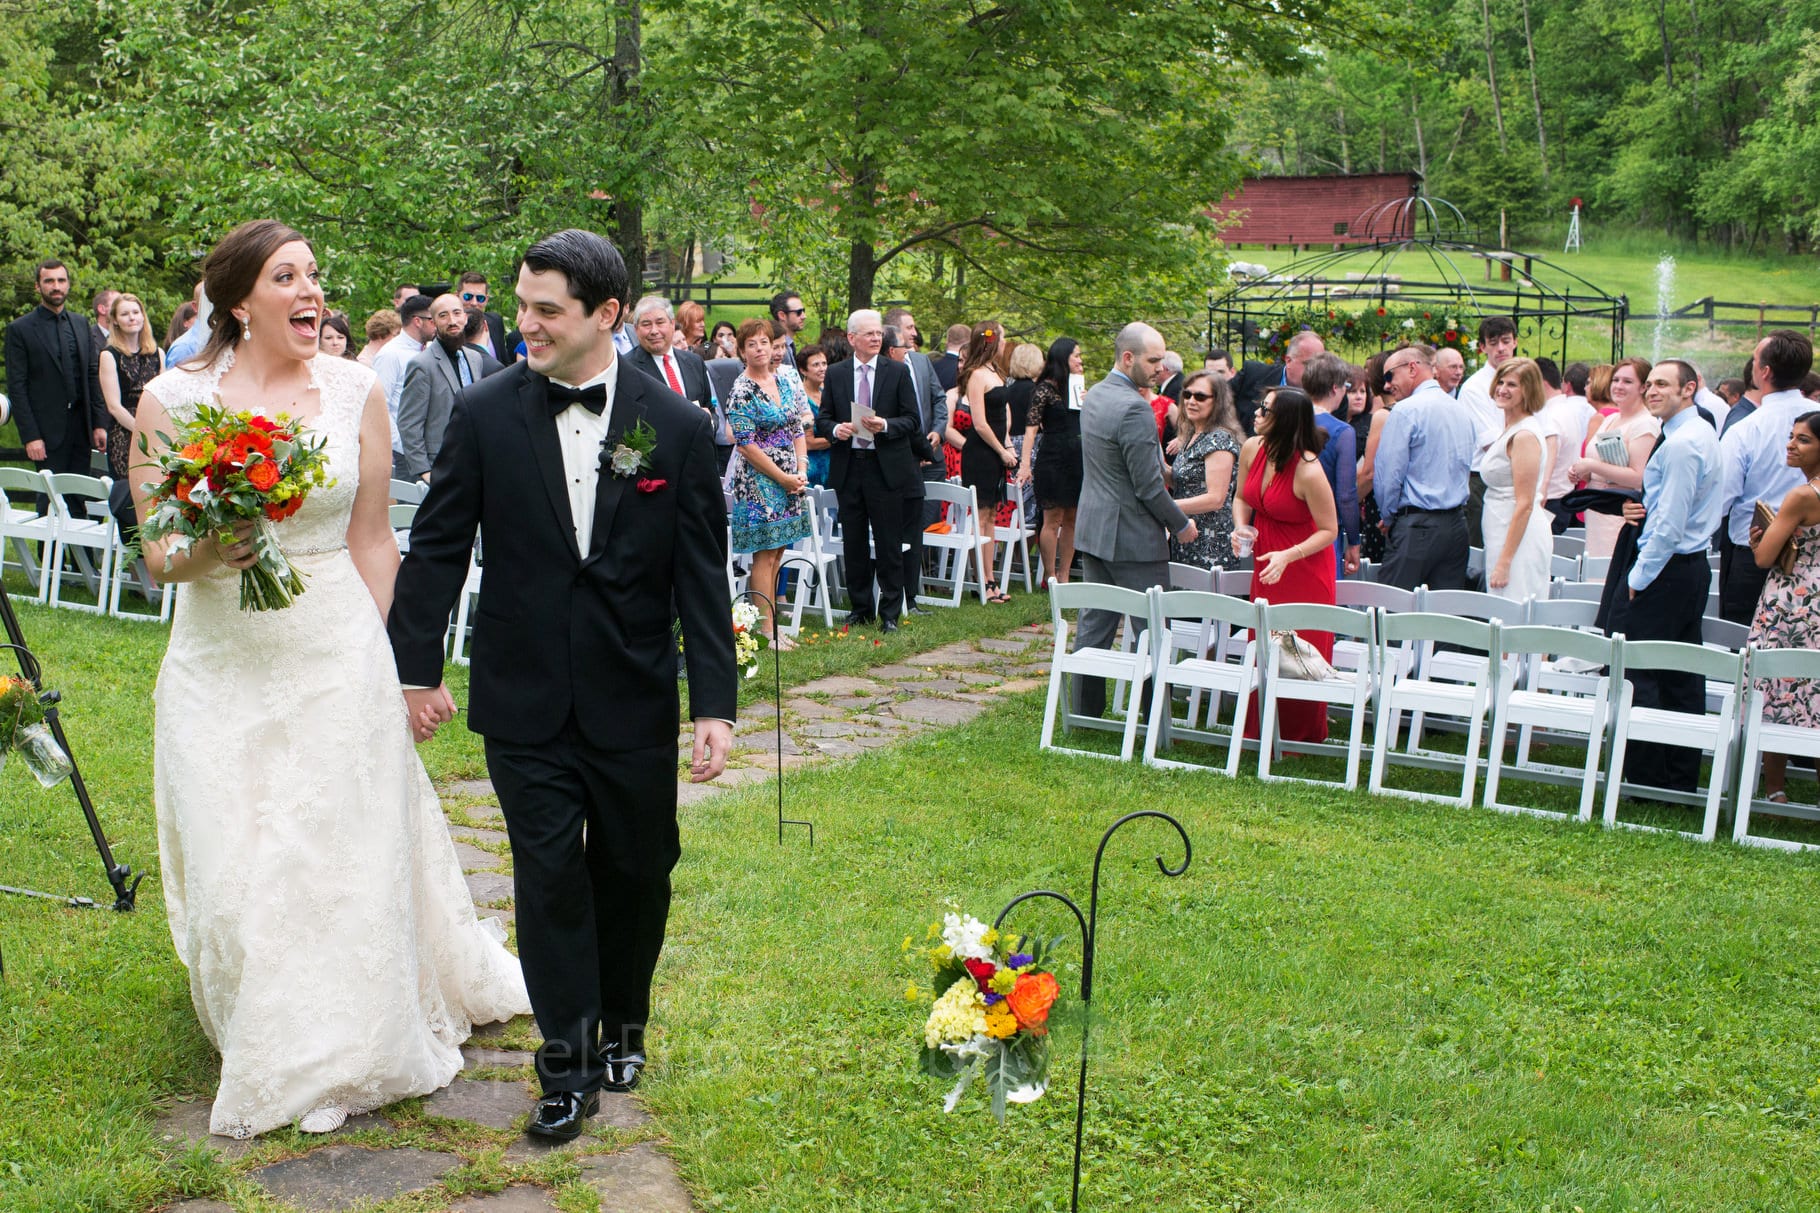 bride and groom exit their outdoor wedding ceremony hand in hand along a stone path